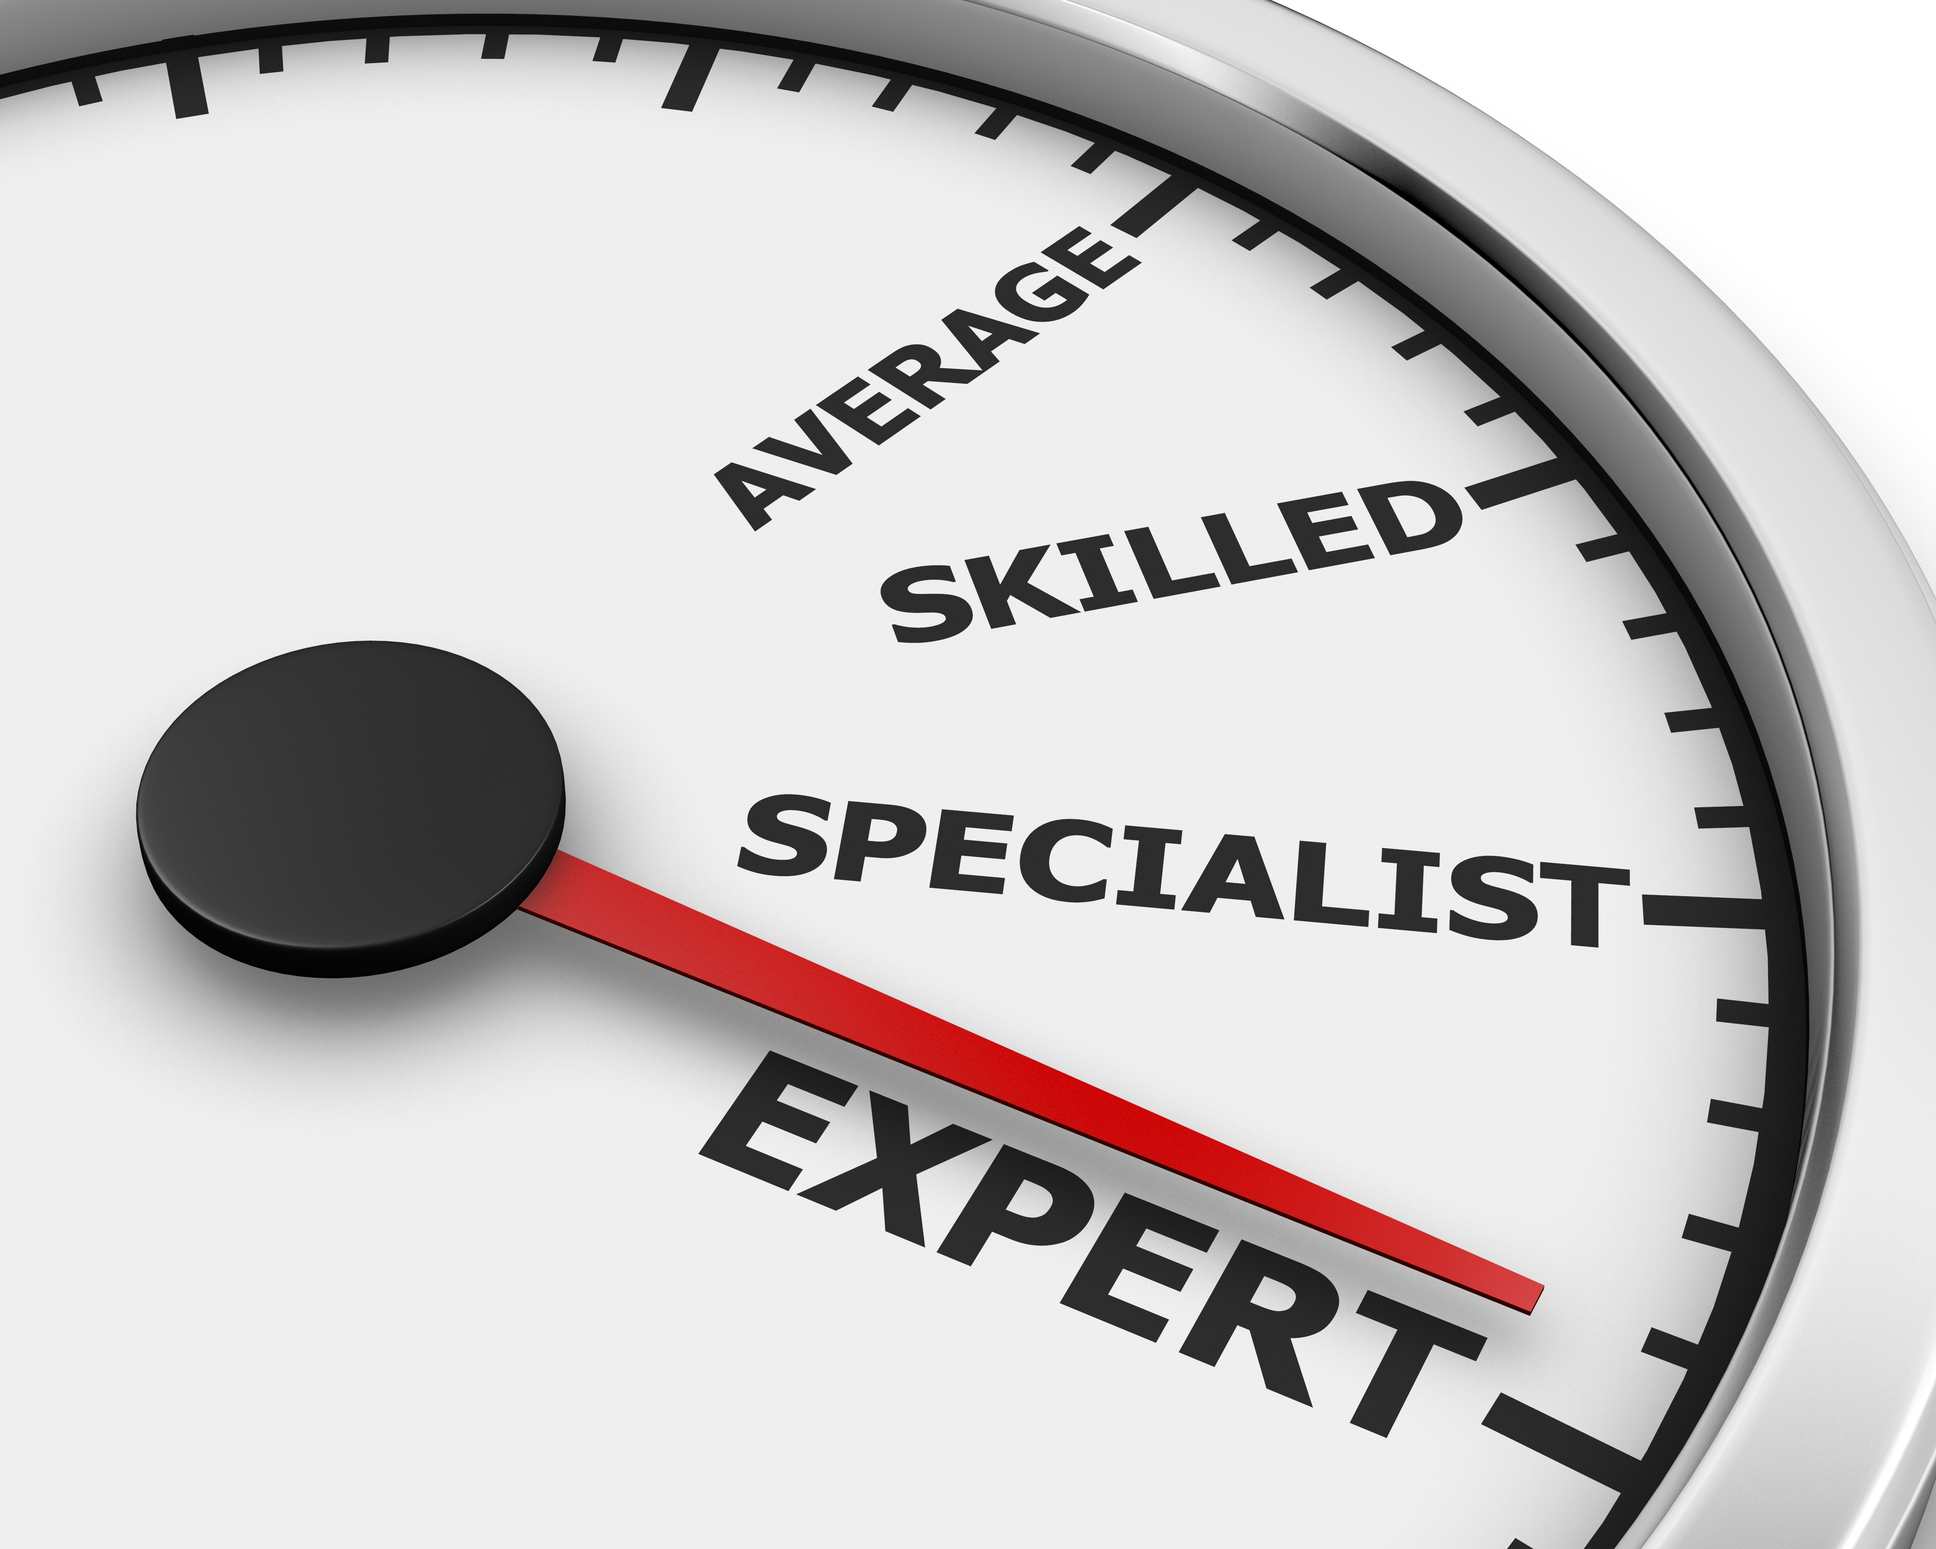 7 tips to help you master expertise